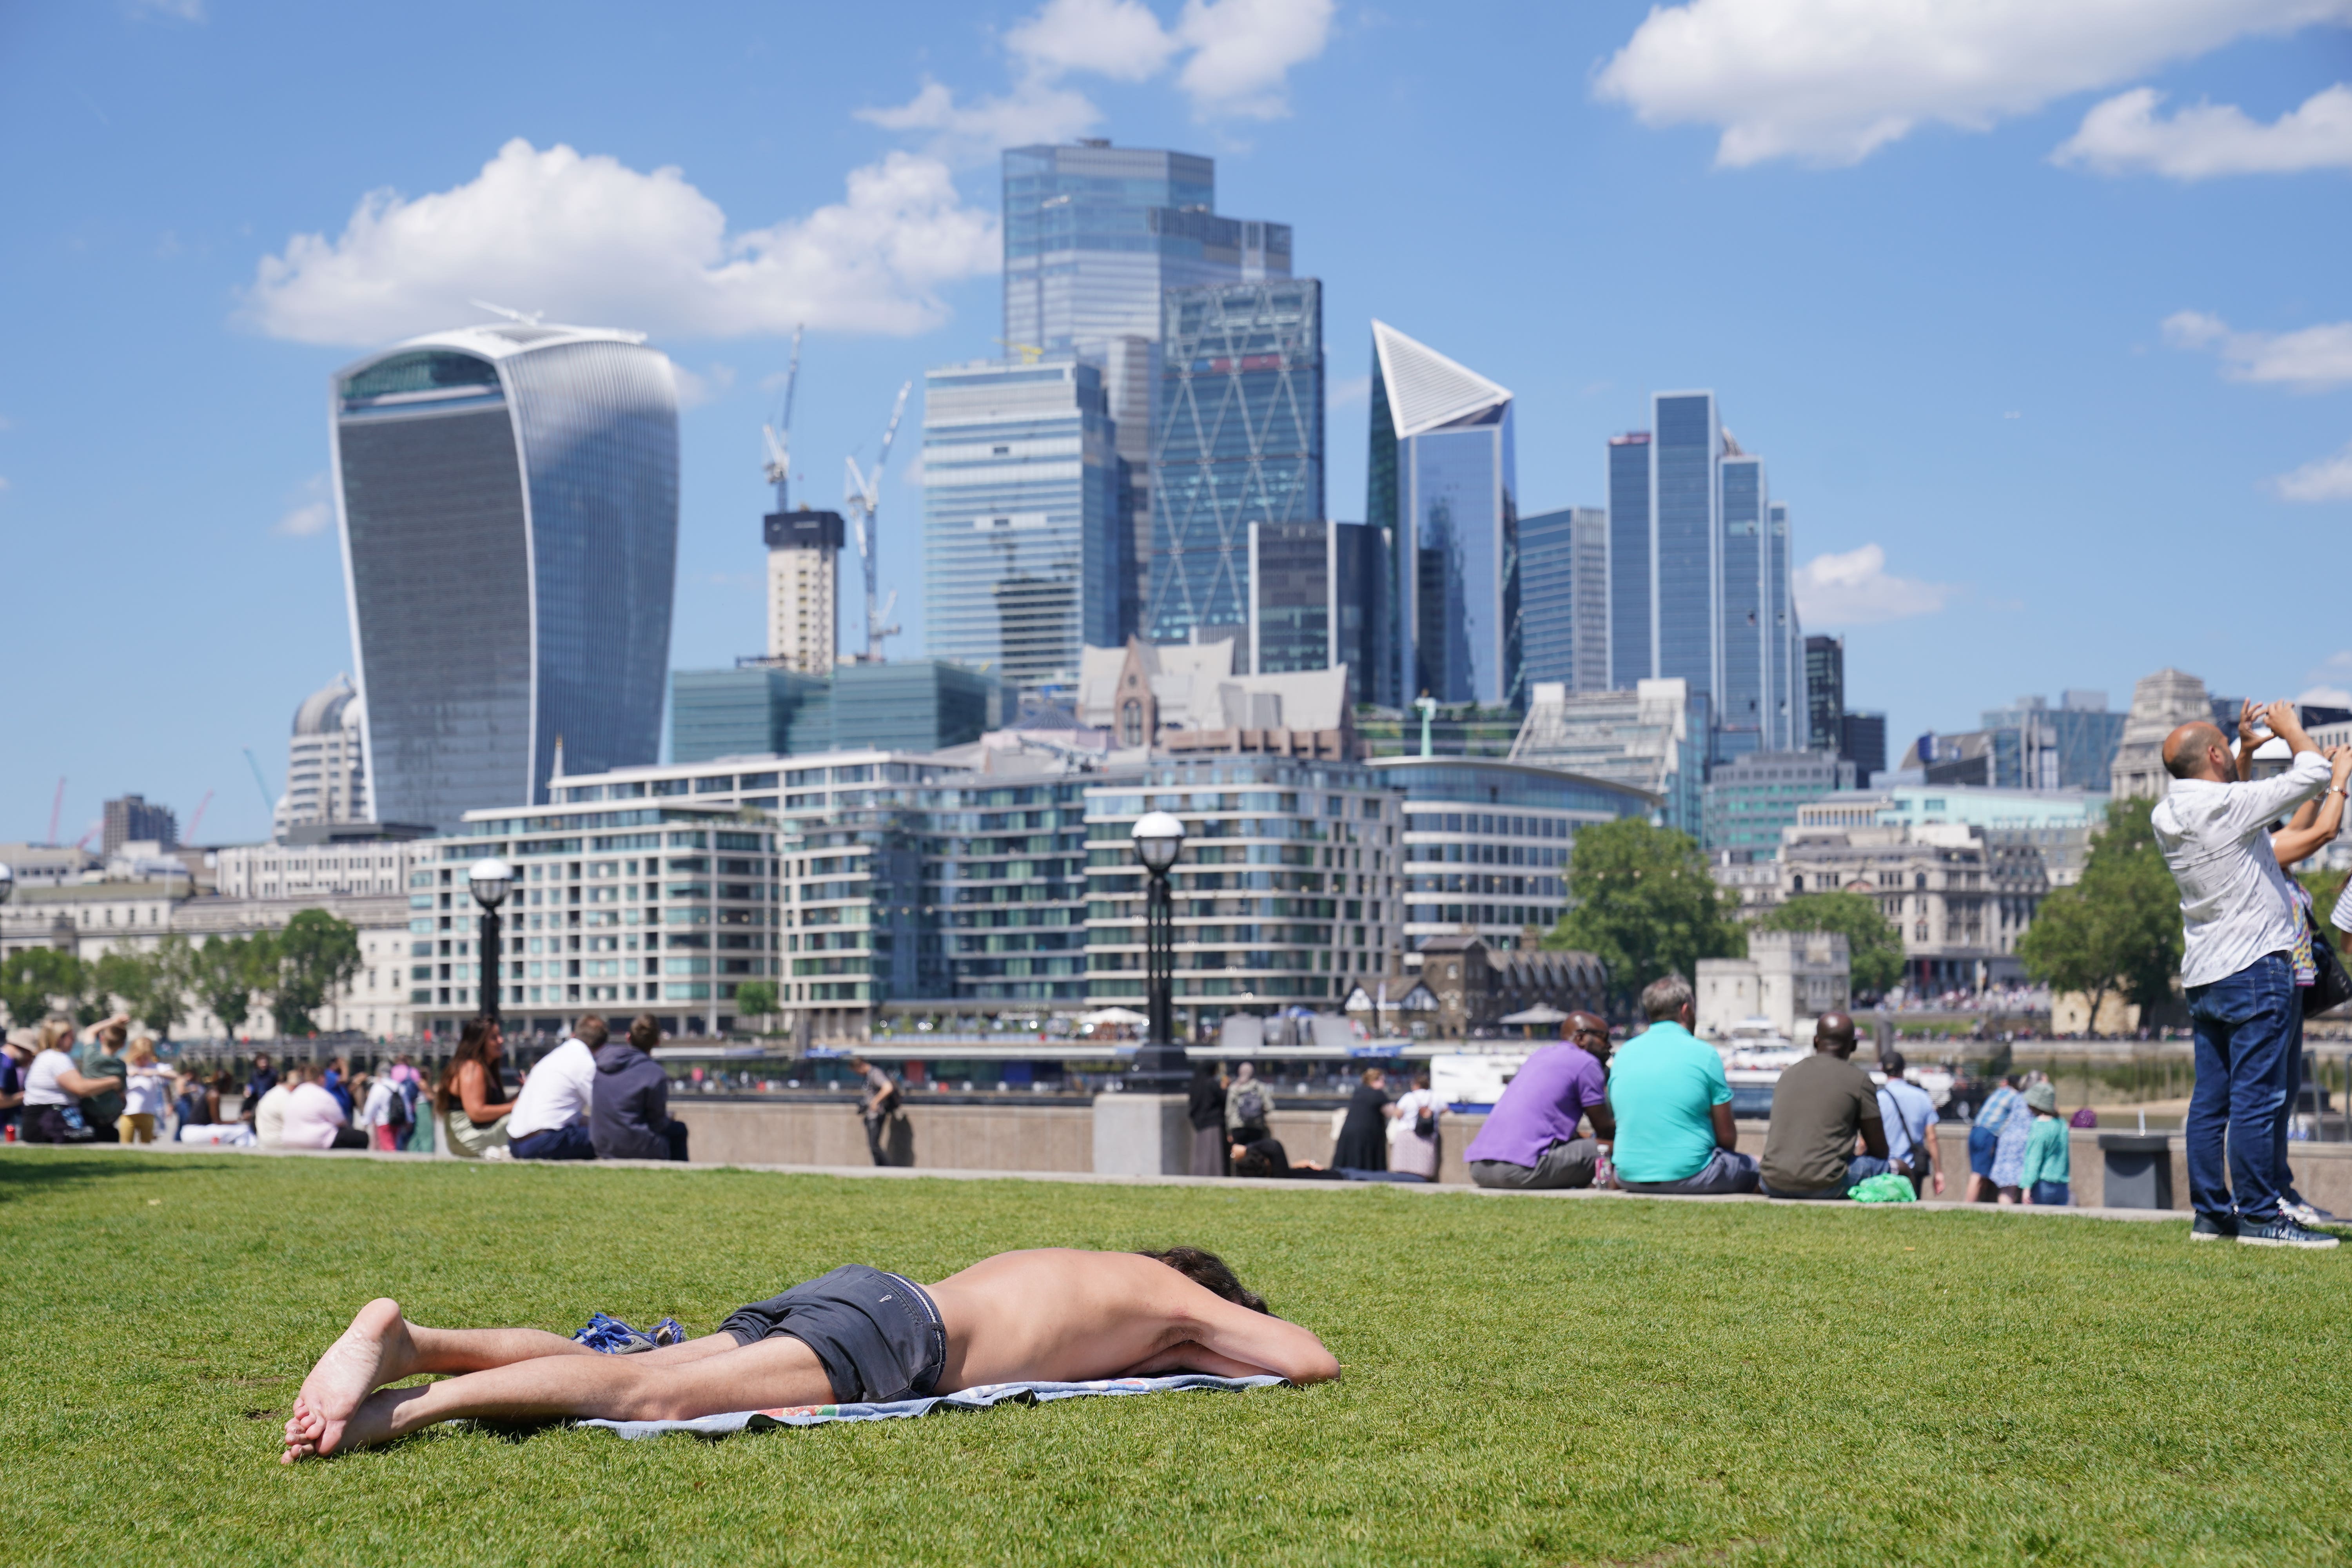 People enjoy the hot weather with a view of the City of London. (Lucy North/PA)